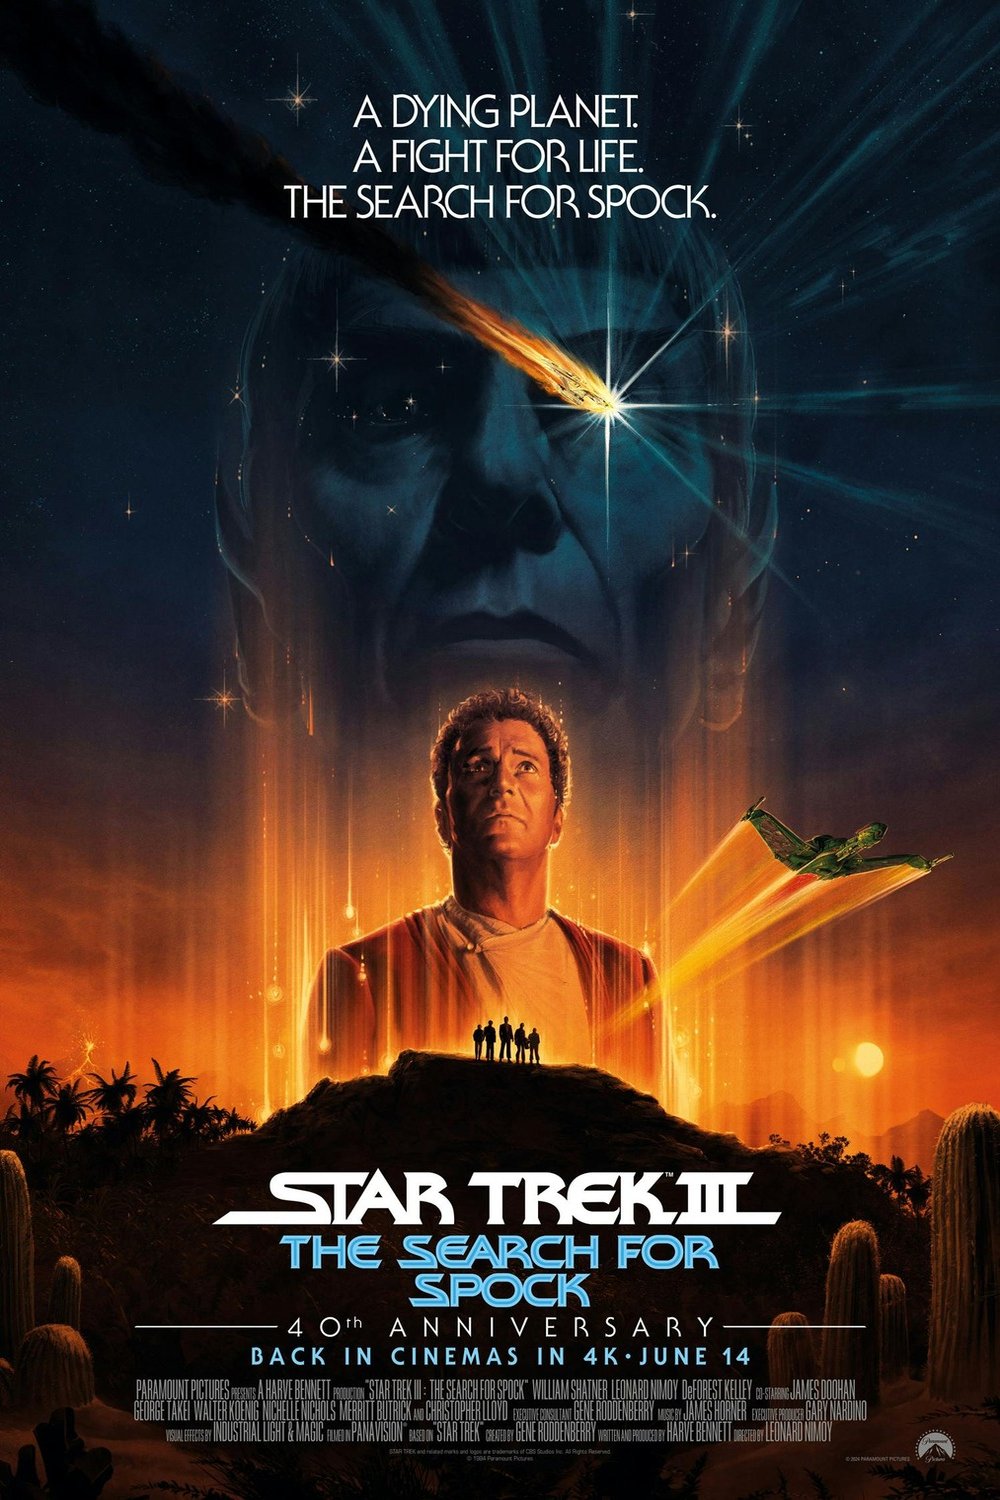 Poster of the movie Star Trek III: The Search for Spock